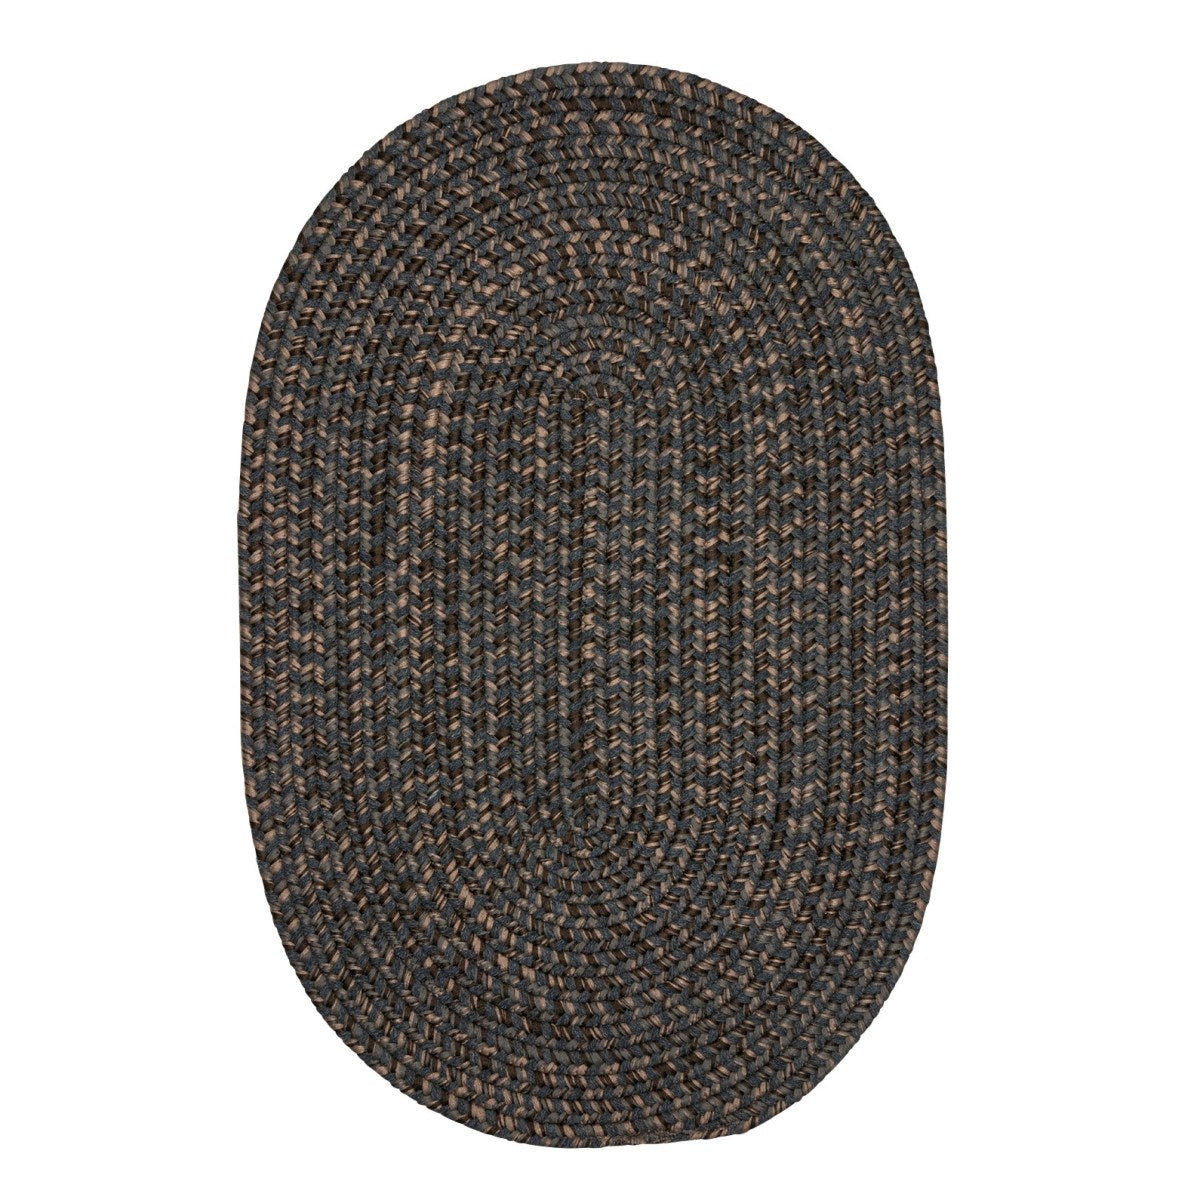 Hayward Charcoal Outdoor Braided Oval Rugs